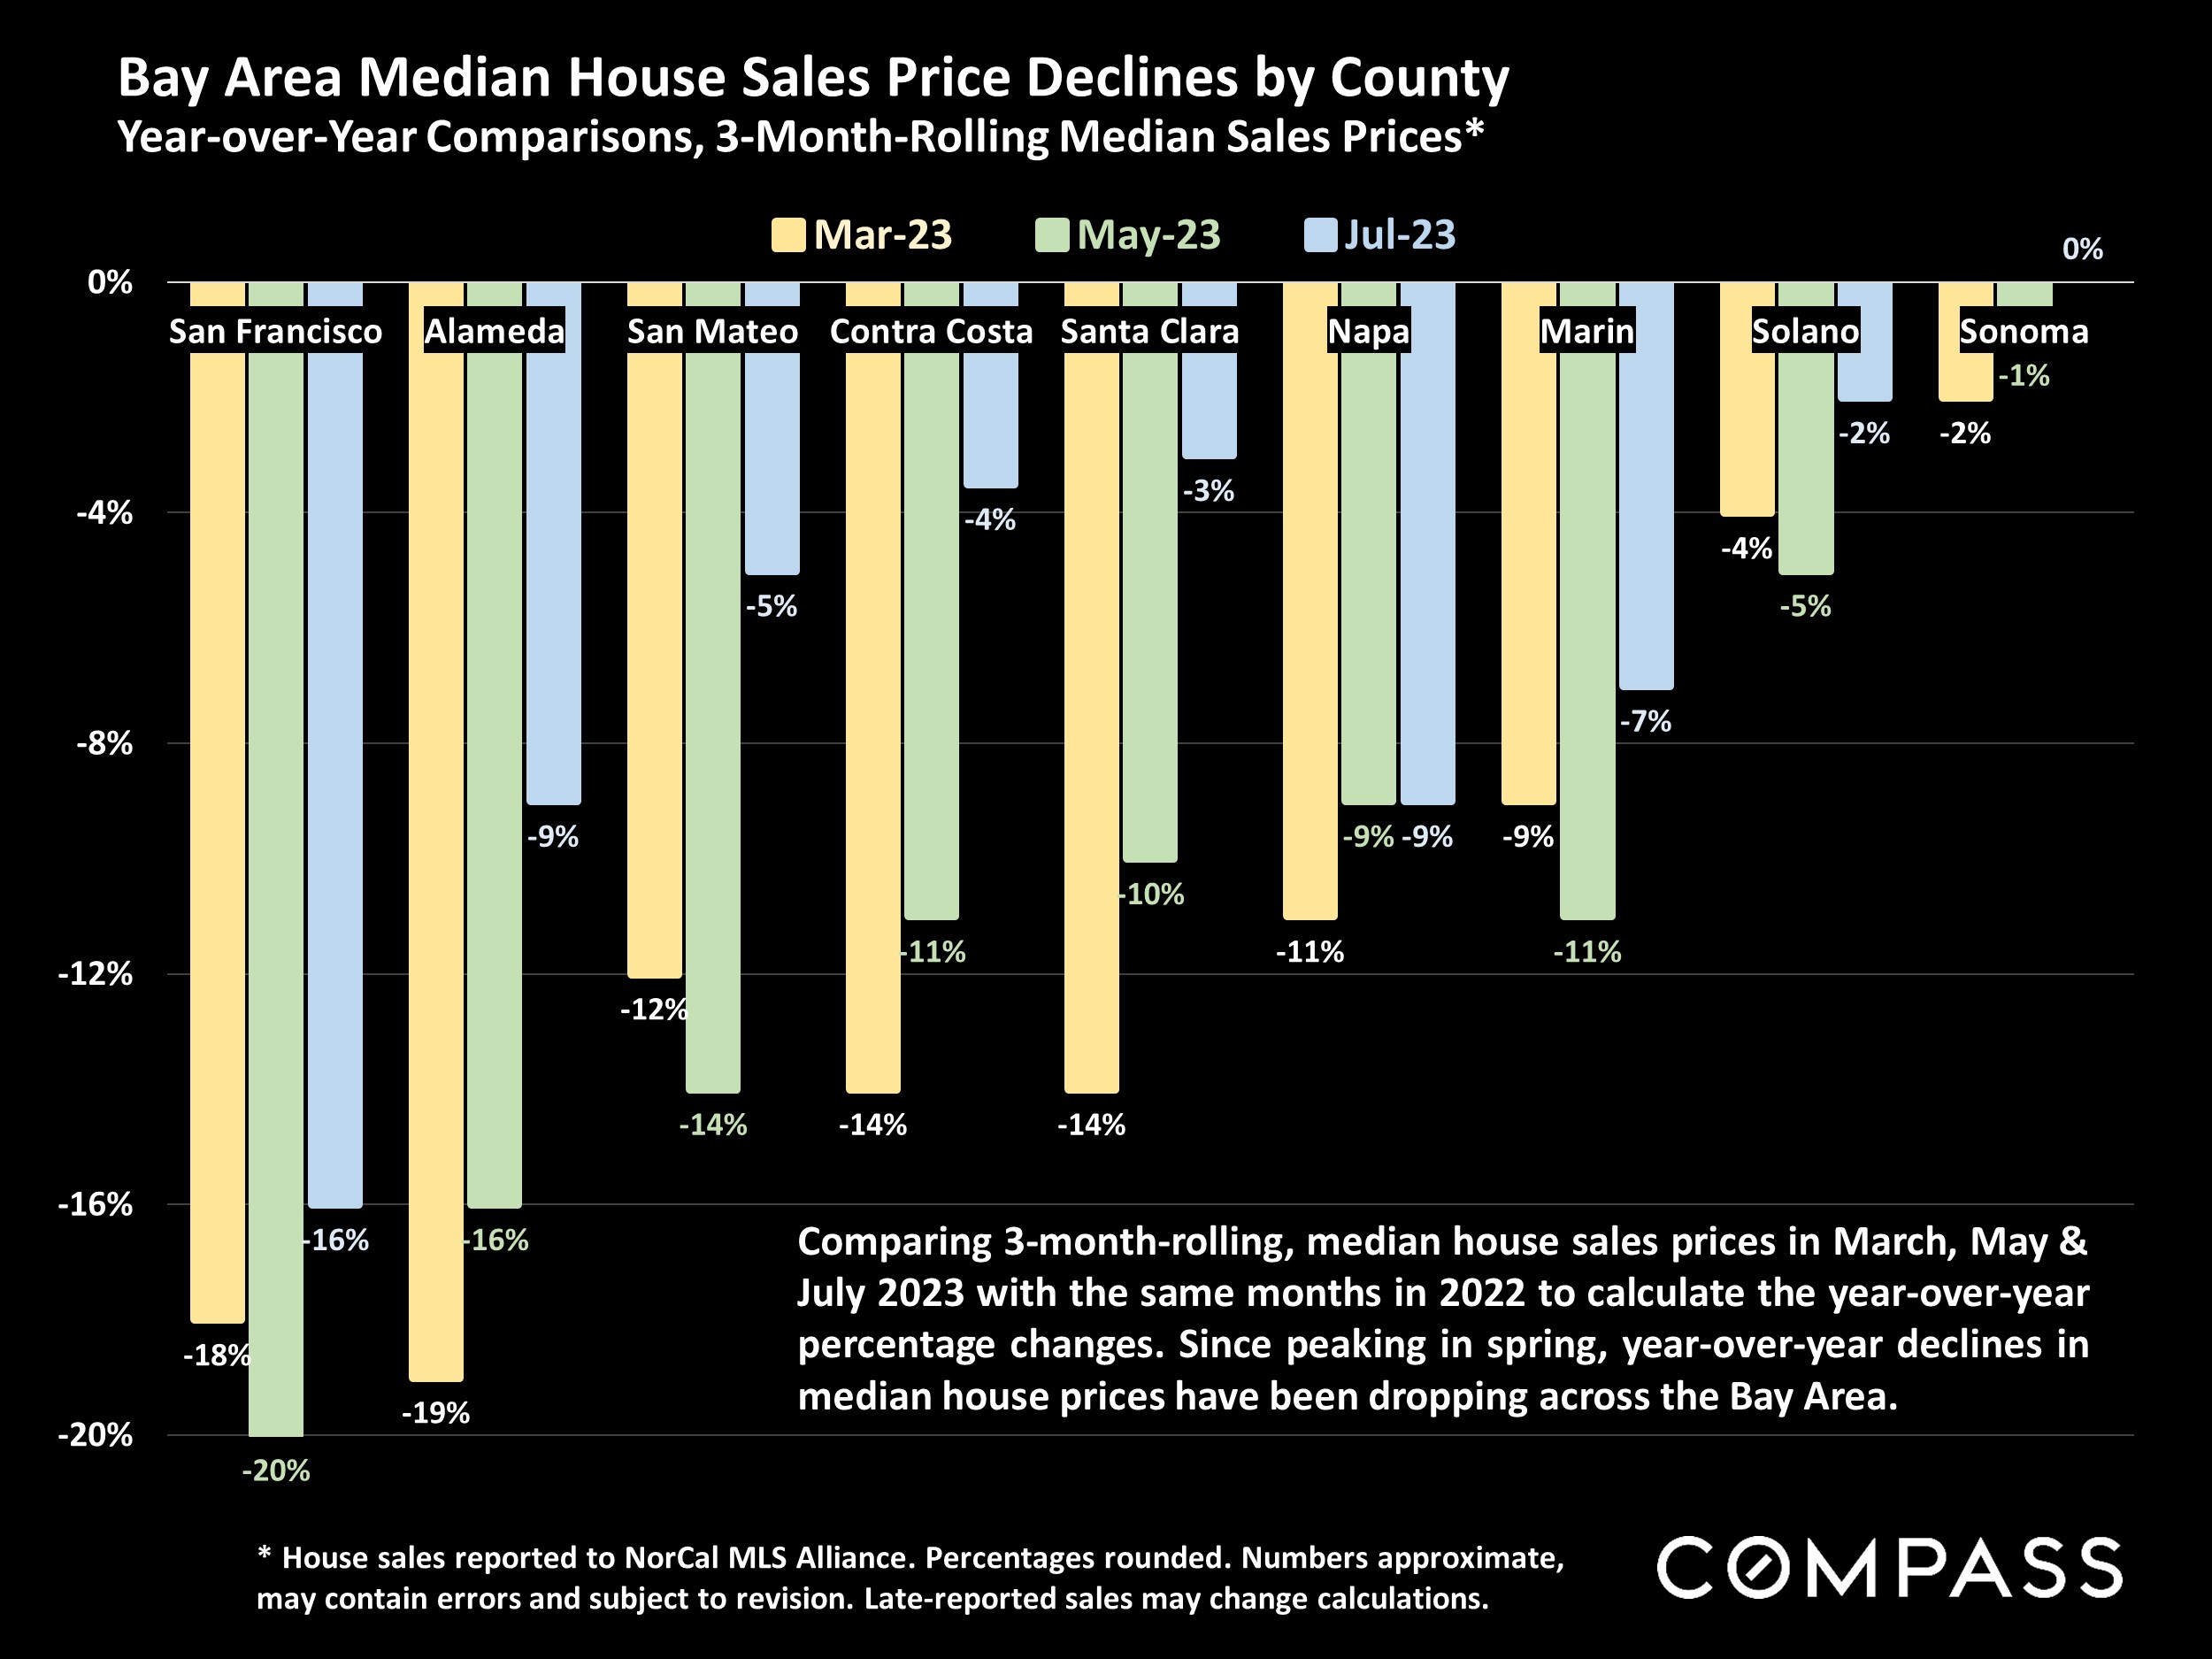 Bay Area Median House Sales Price Declines by County Year-over-Year Comparisons, 3-Month-Rolling Median Sales Prices*